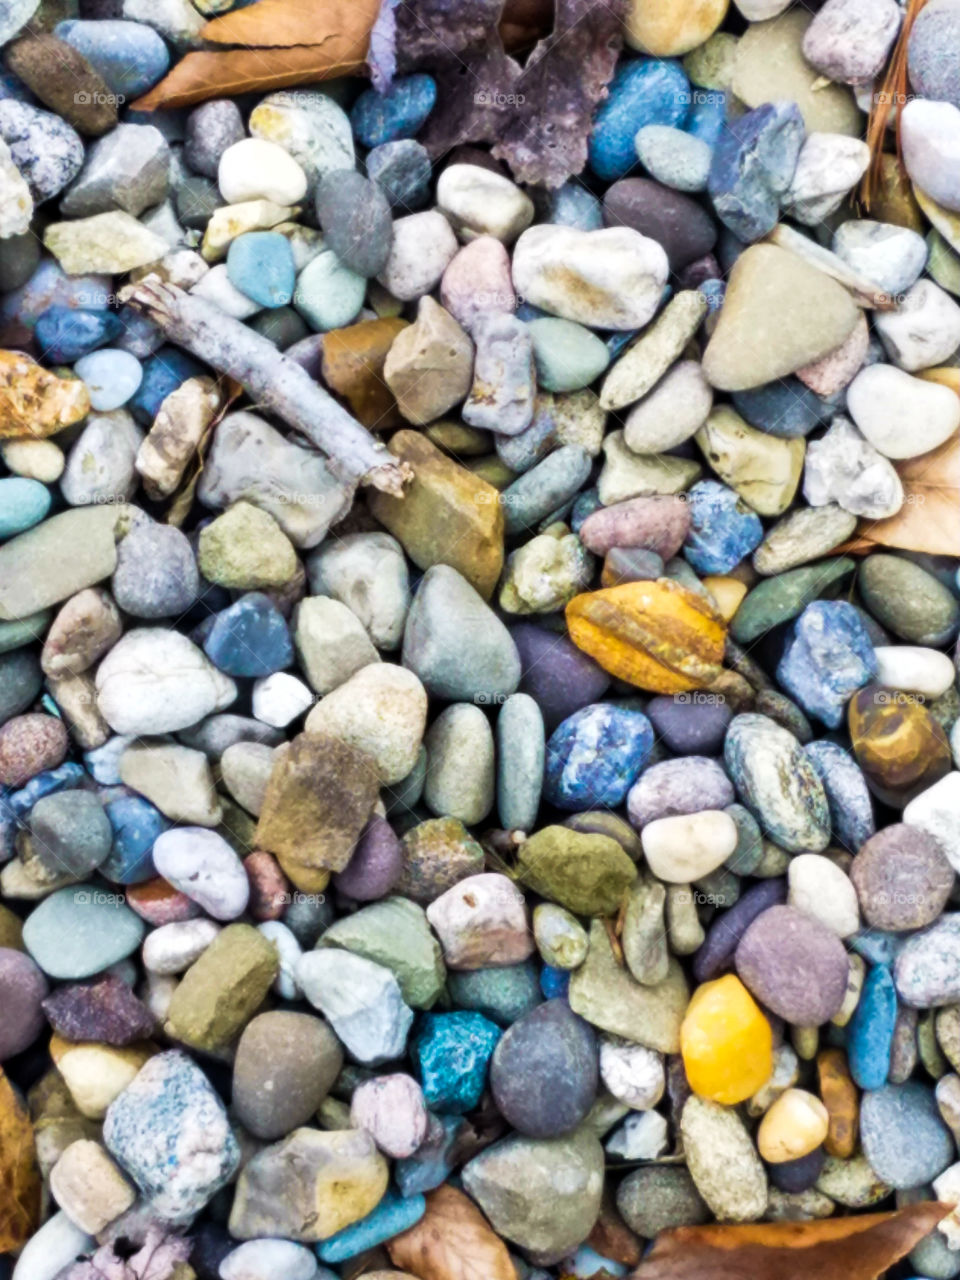 Mixture of colorful pebbles, rocks, and stones, oh my!